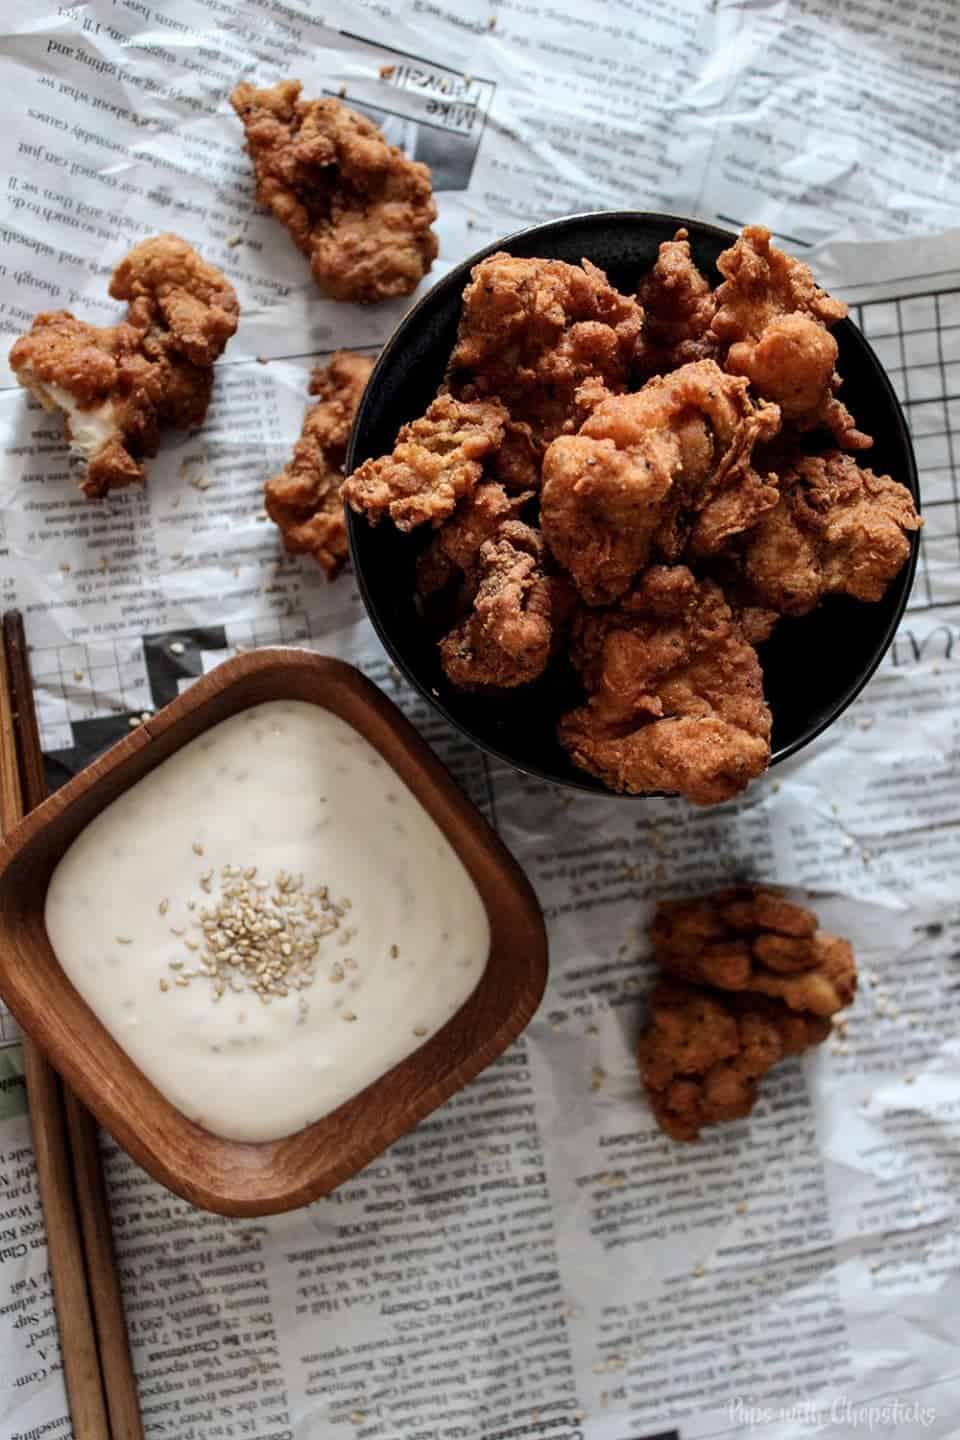 Topview of Crispy Buttermilk Popcorn Chicken with Creamy Honey Sesame Dip on a table laid out on newspaper